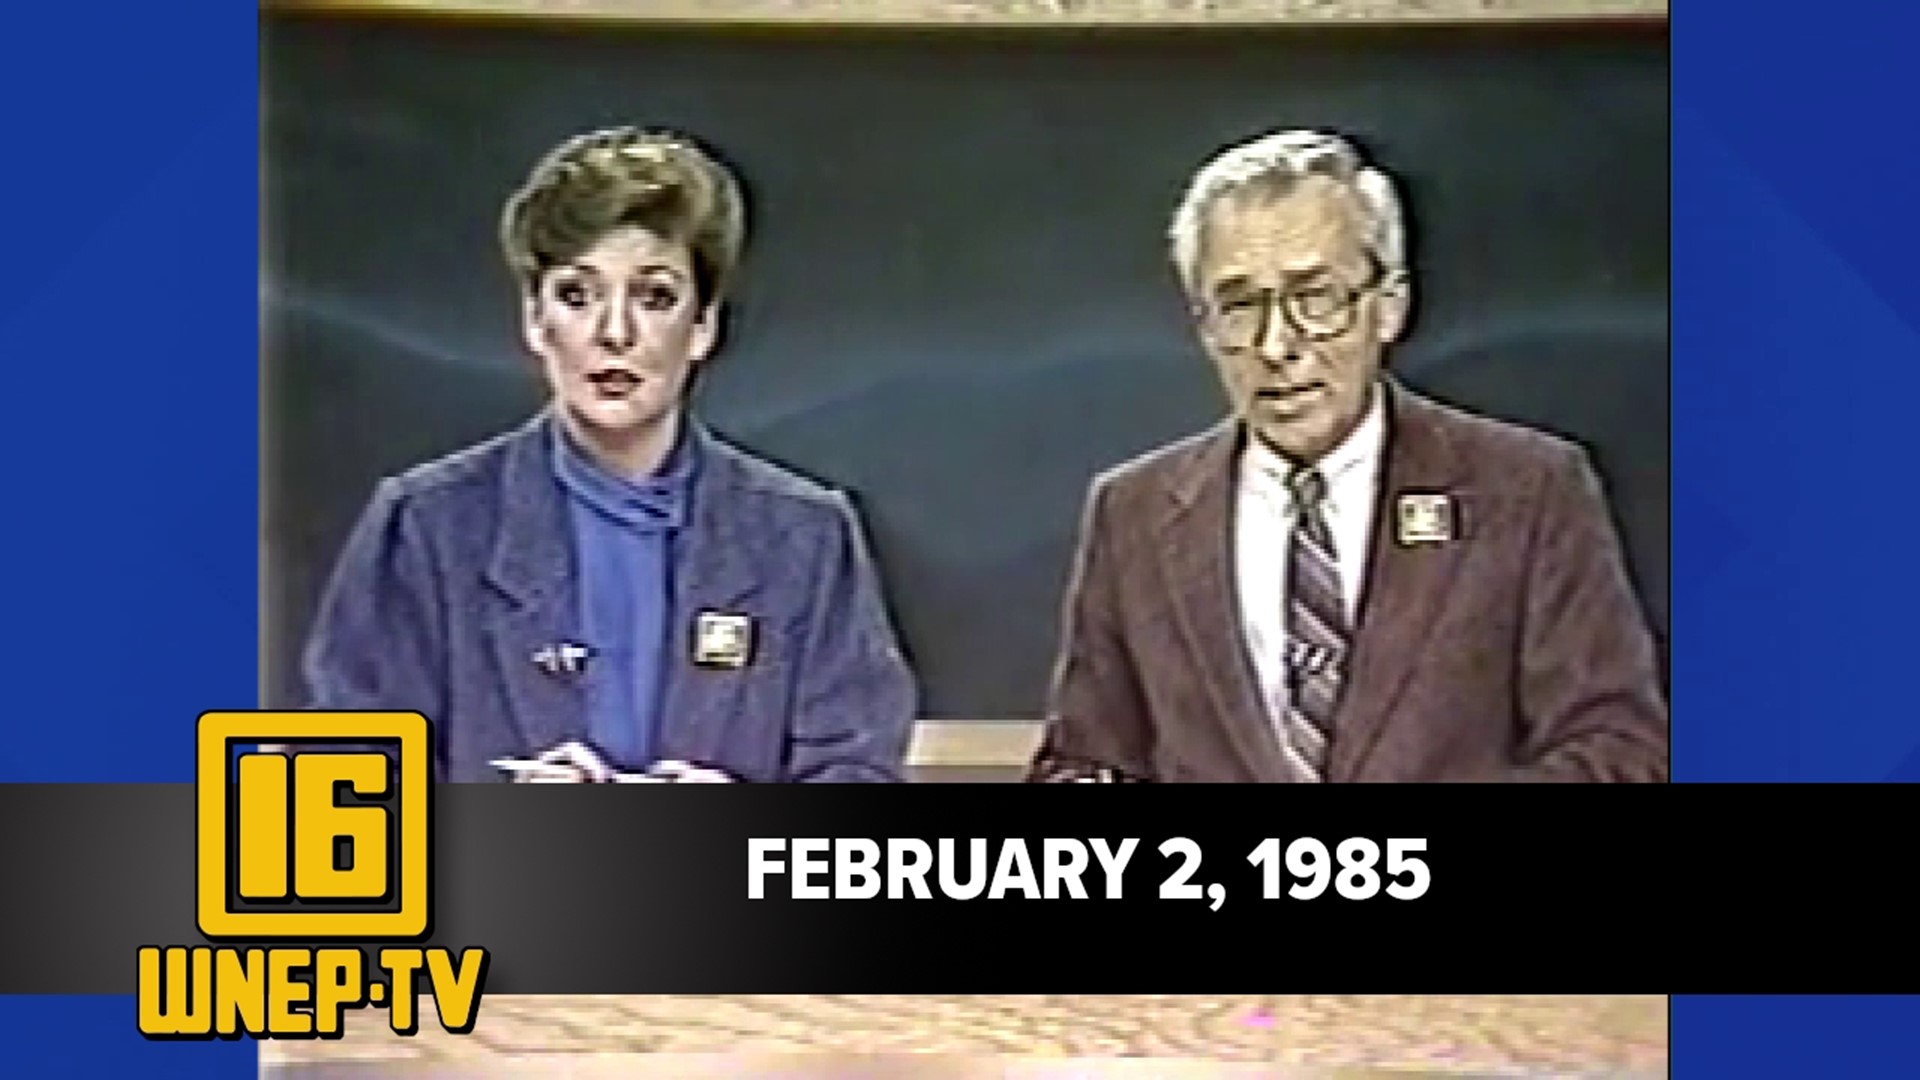 Join Karen Harch and Nolan Johannes with curated stories from February 2, 1985.